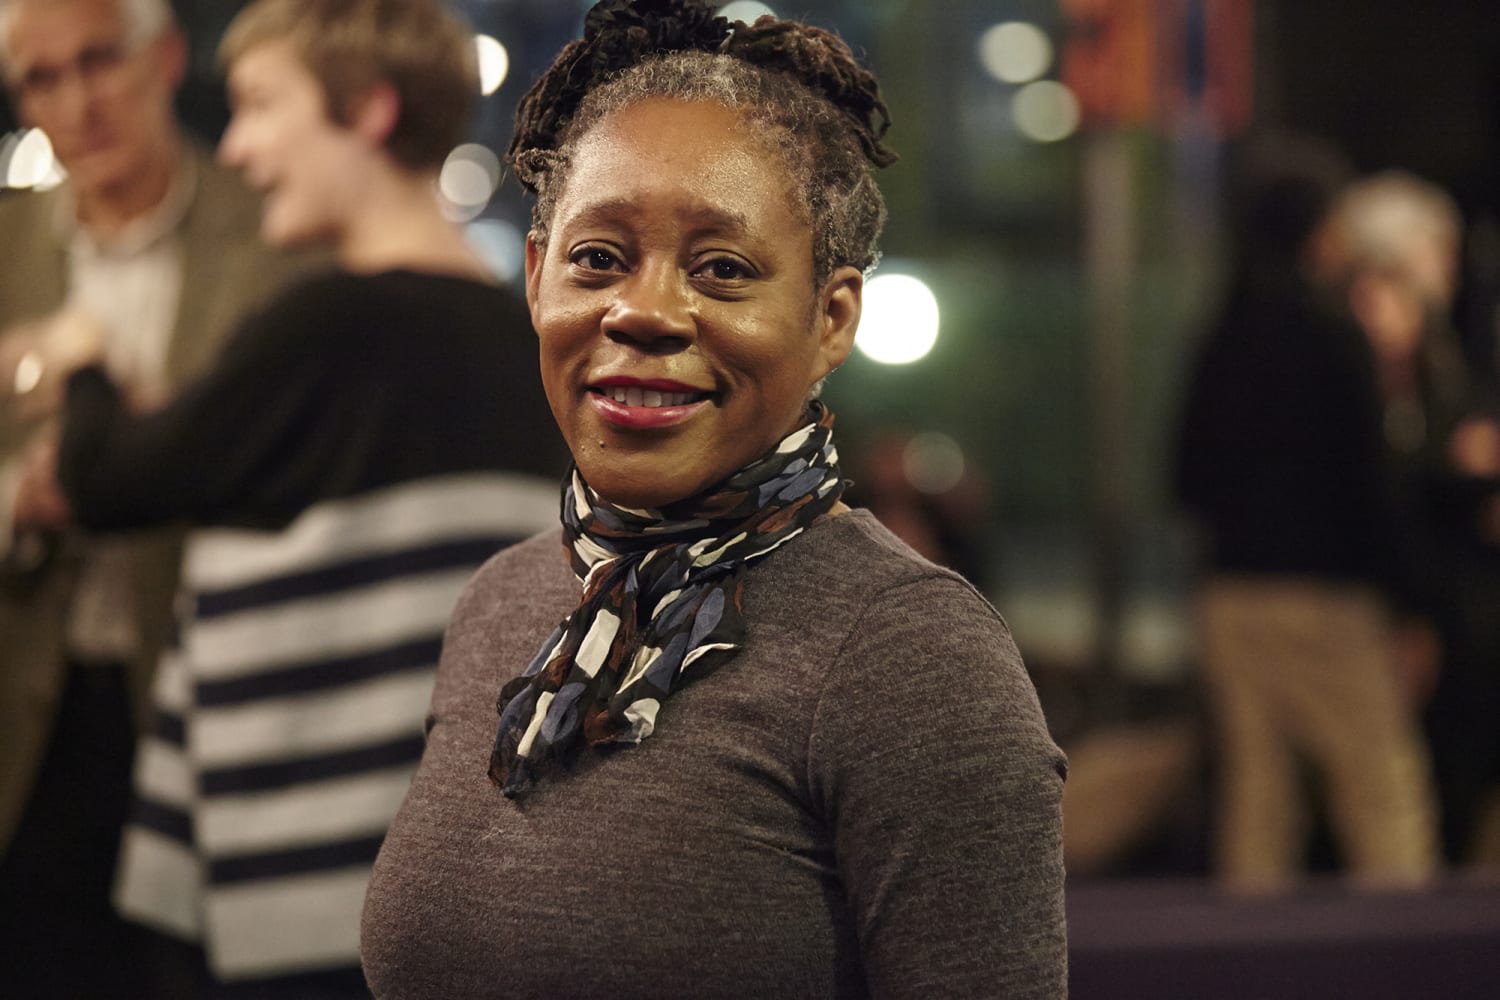 Artist Sonia Boyce Will Be the First Black Woman to Represent the UK at the Venice Biennale